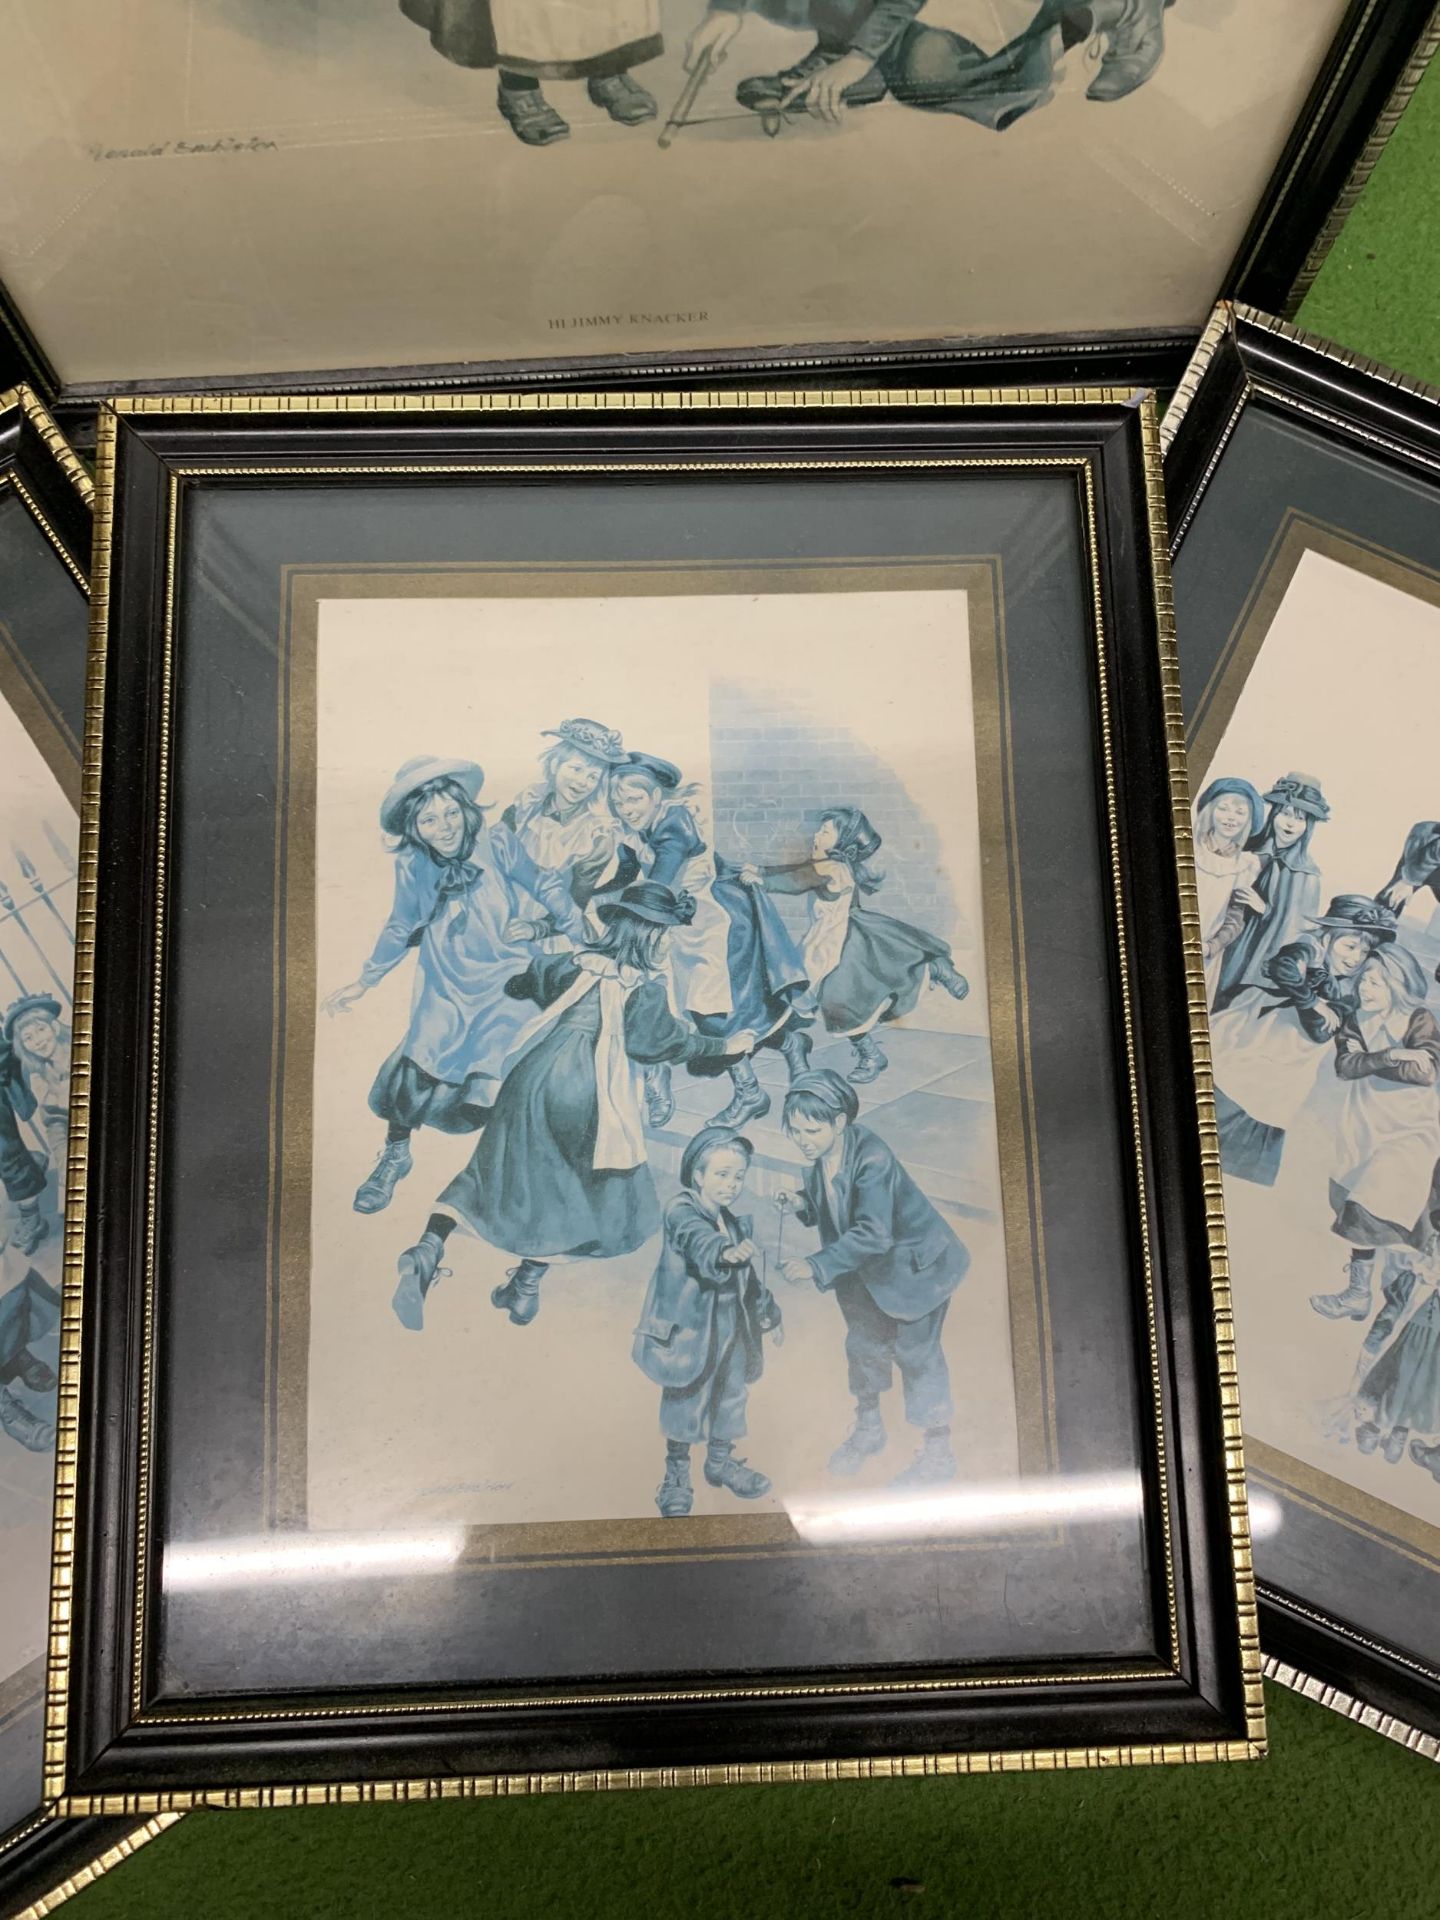 FOUR FRAMED PRINTS BY GERALD EMBLETON DEPICTING VICTORIAN PLAYGROUND DAYS - Image 2 of 4